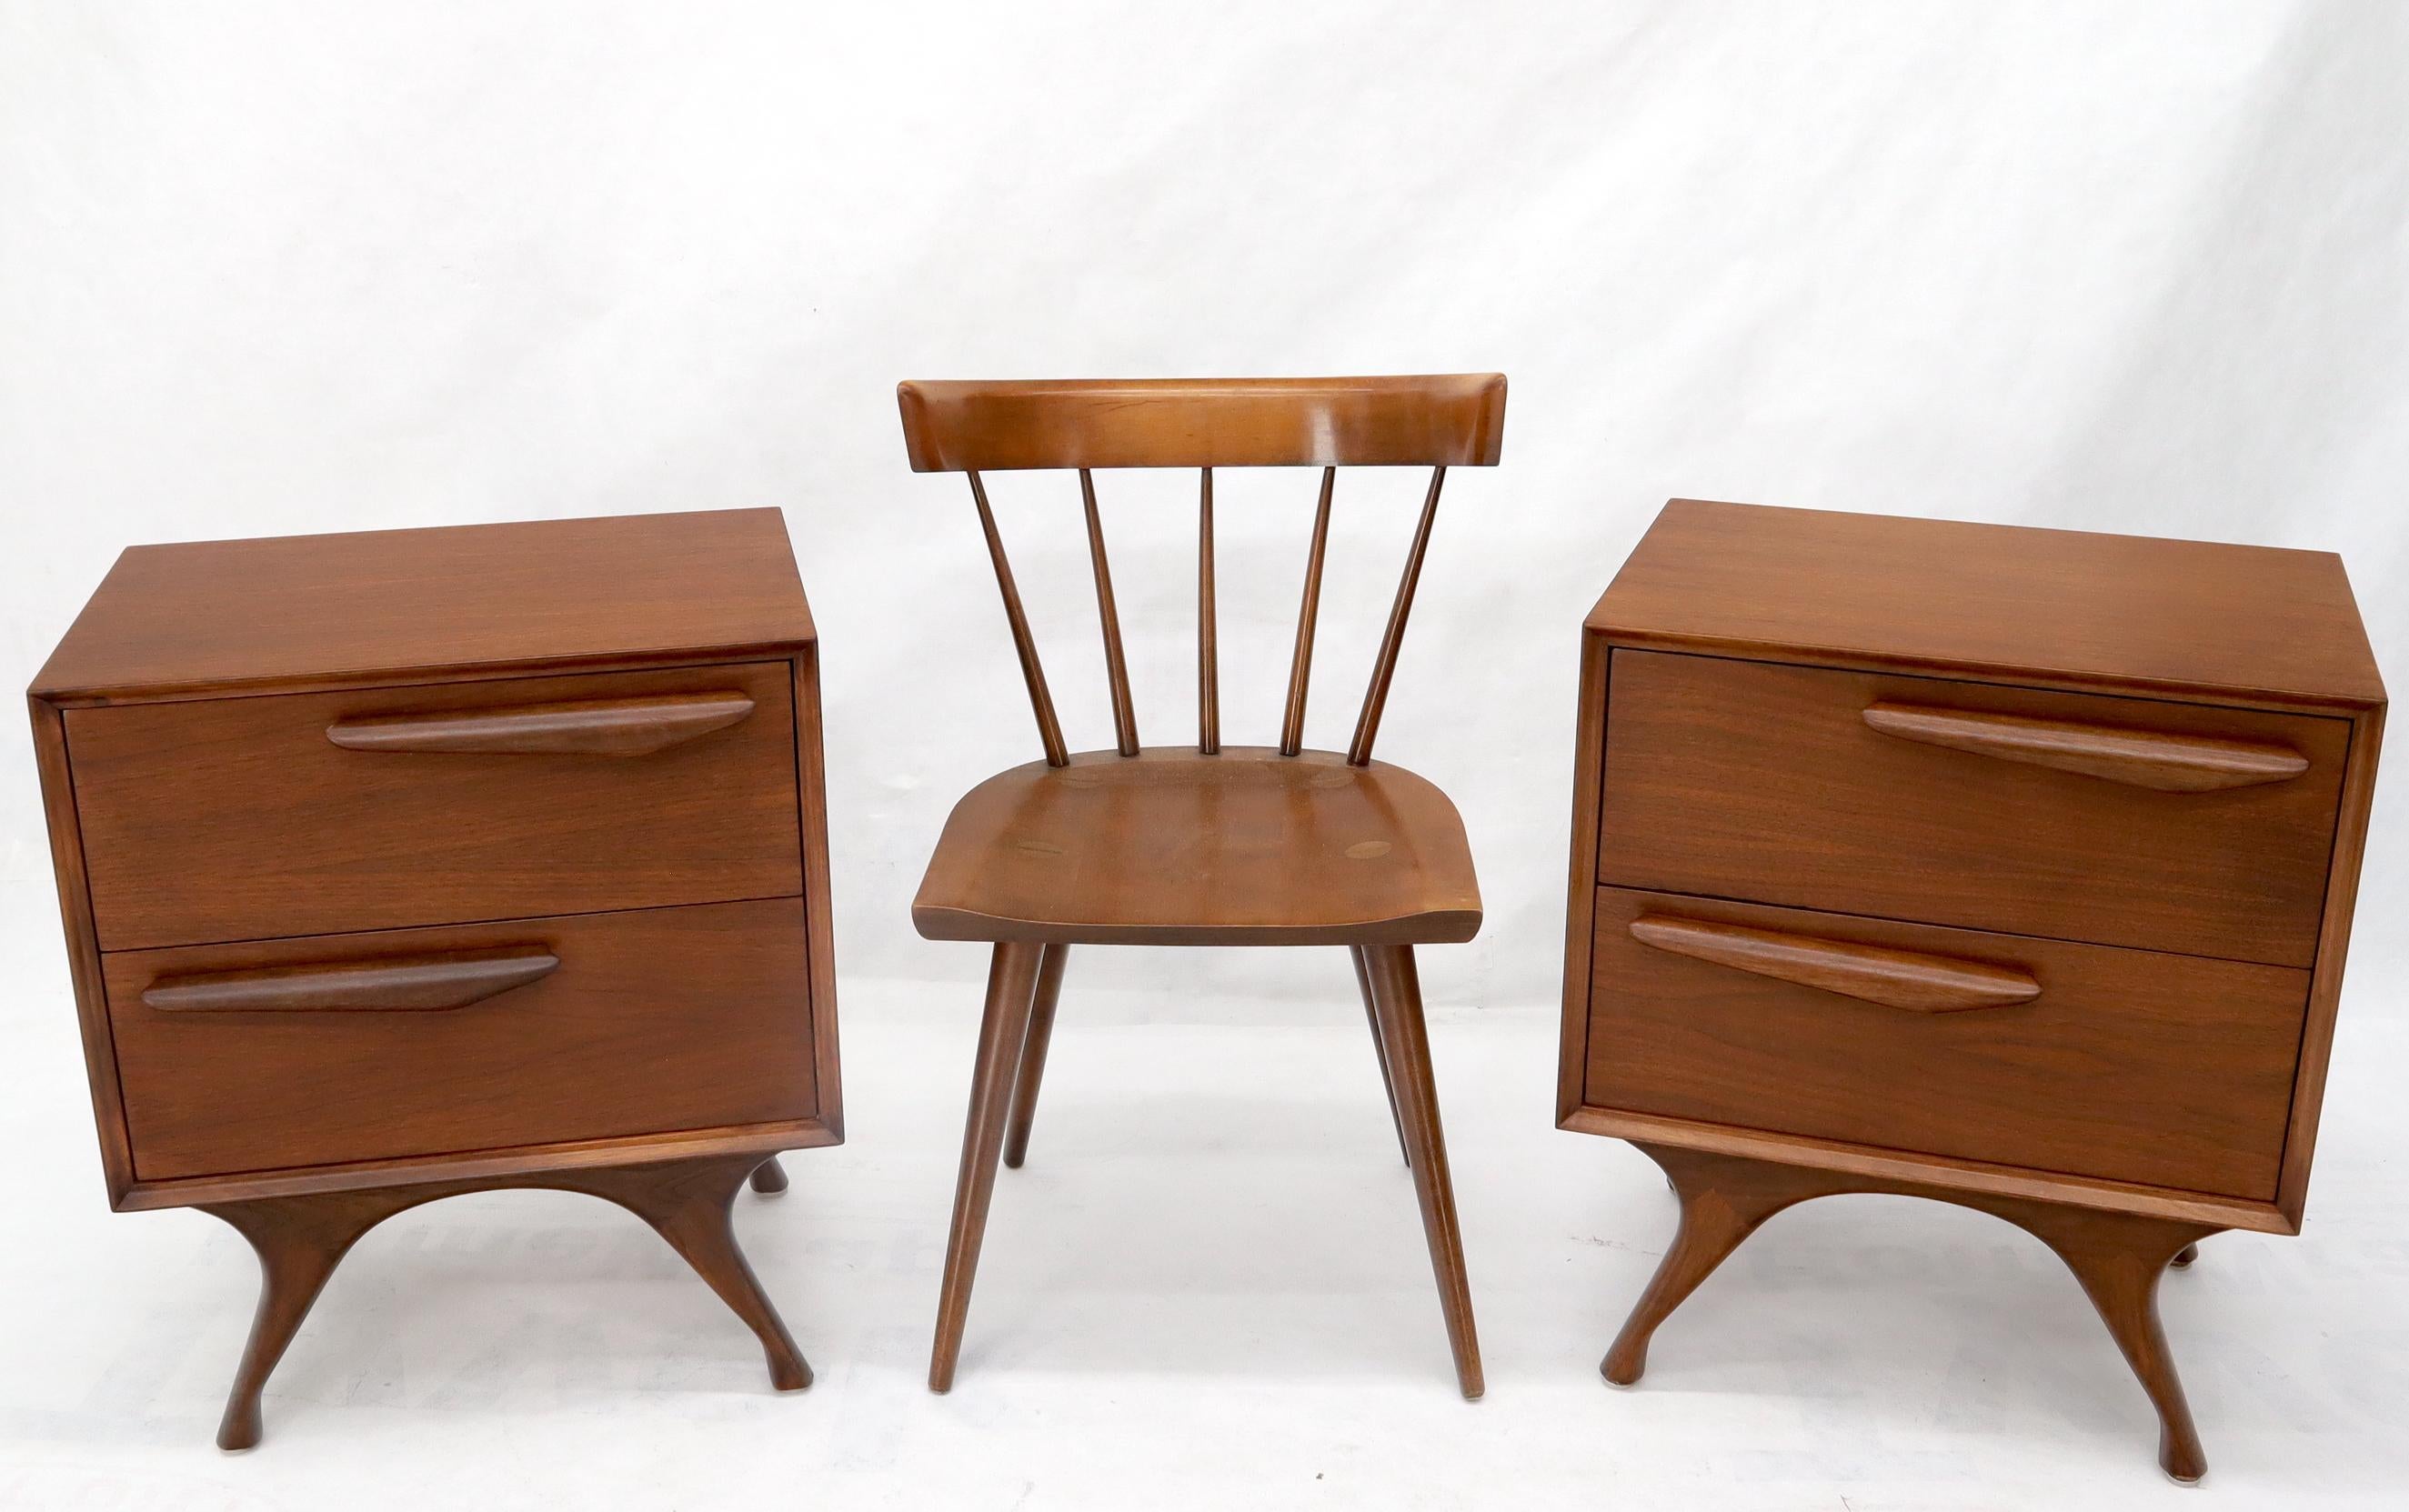 Pair of refinished American walnut Mid-Century Modern sculptured legs and pulls nightstands end tables cabinets. Vladimir Kagan decor match inspiration.